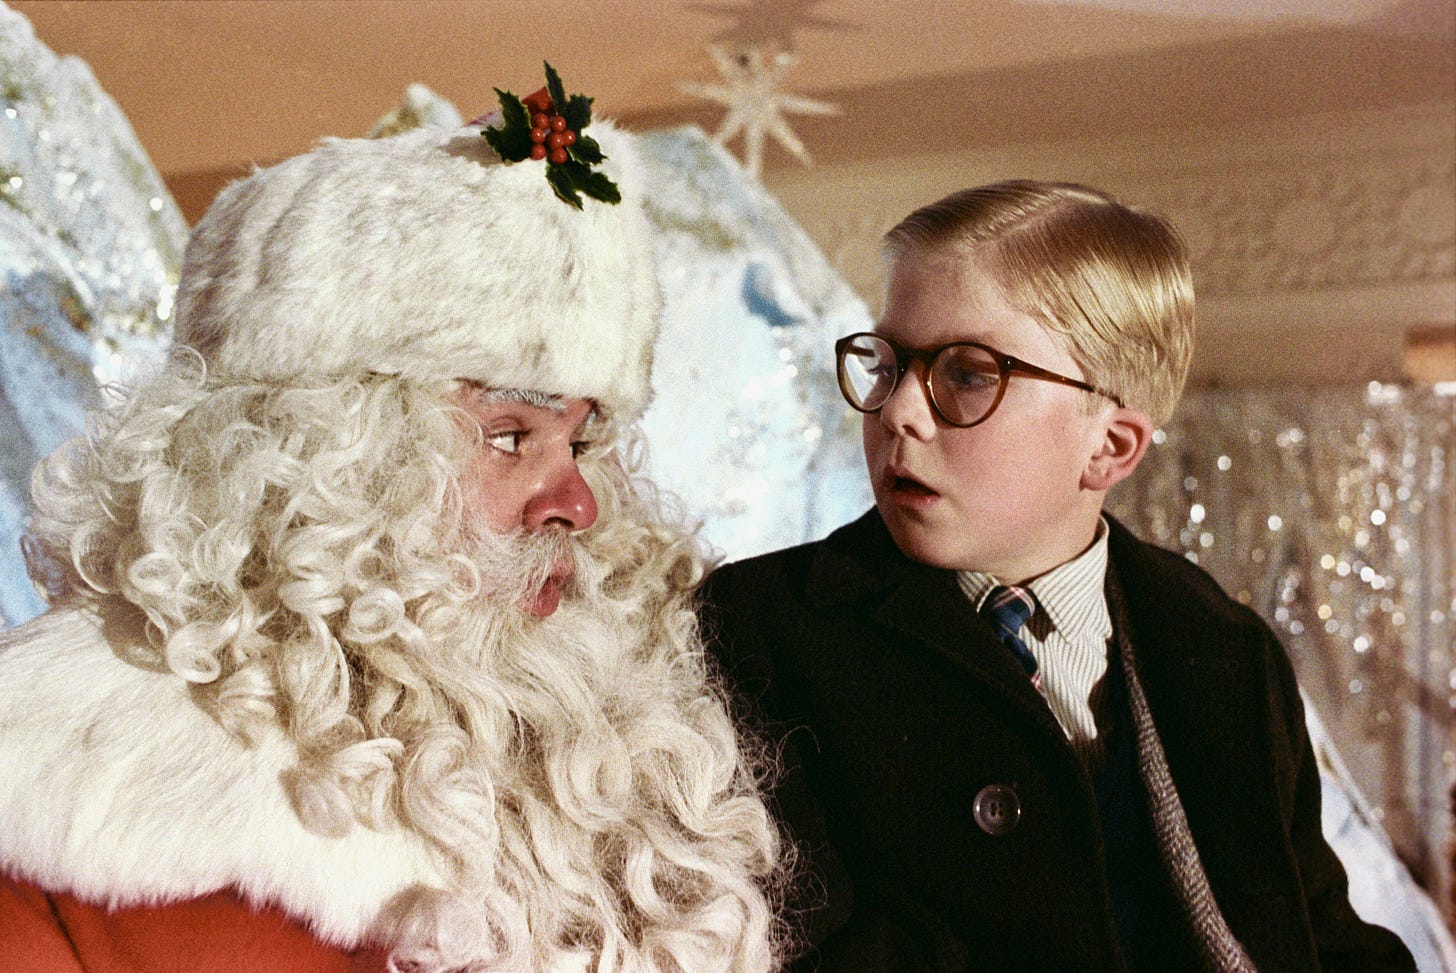 A bespectacled boy sits on the lap of a department-store Santa